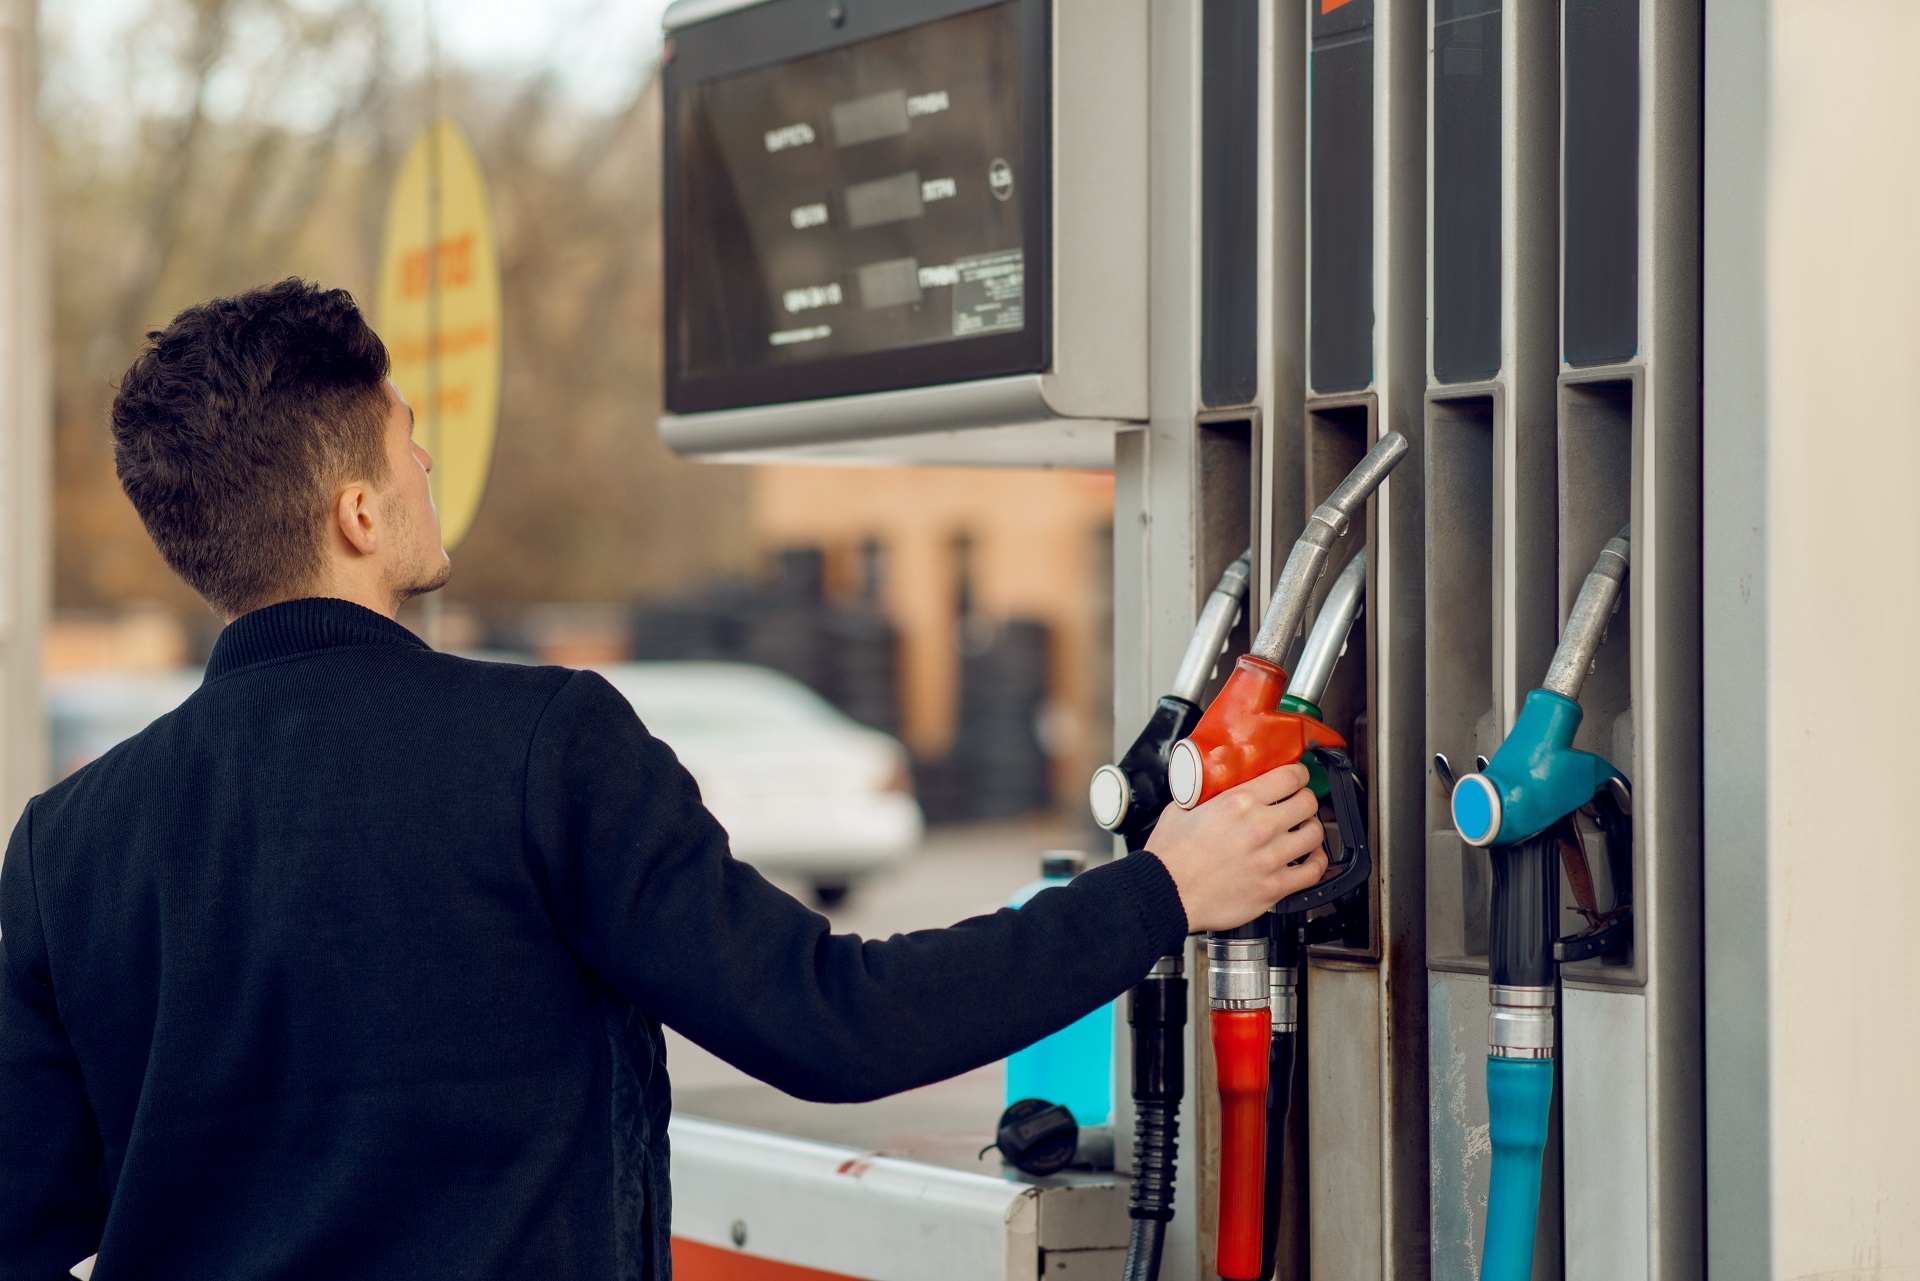 Gas stations will not show the price per liter